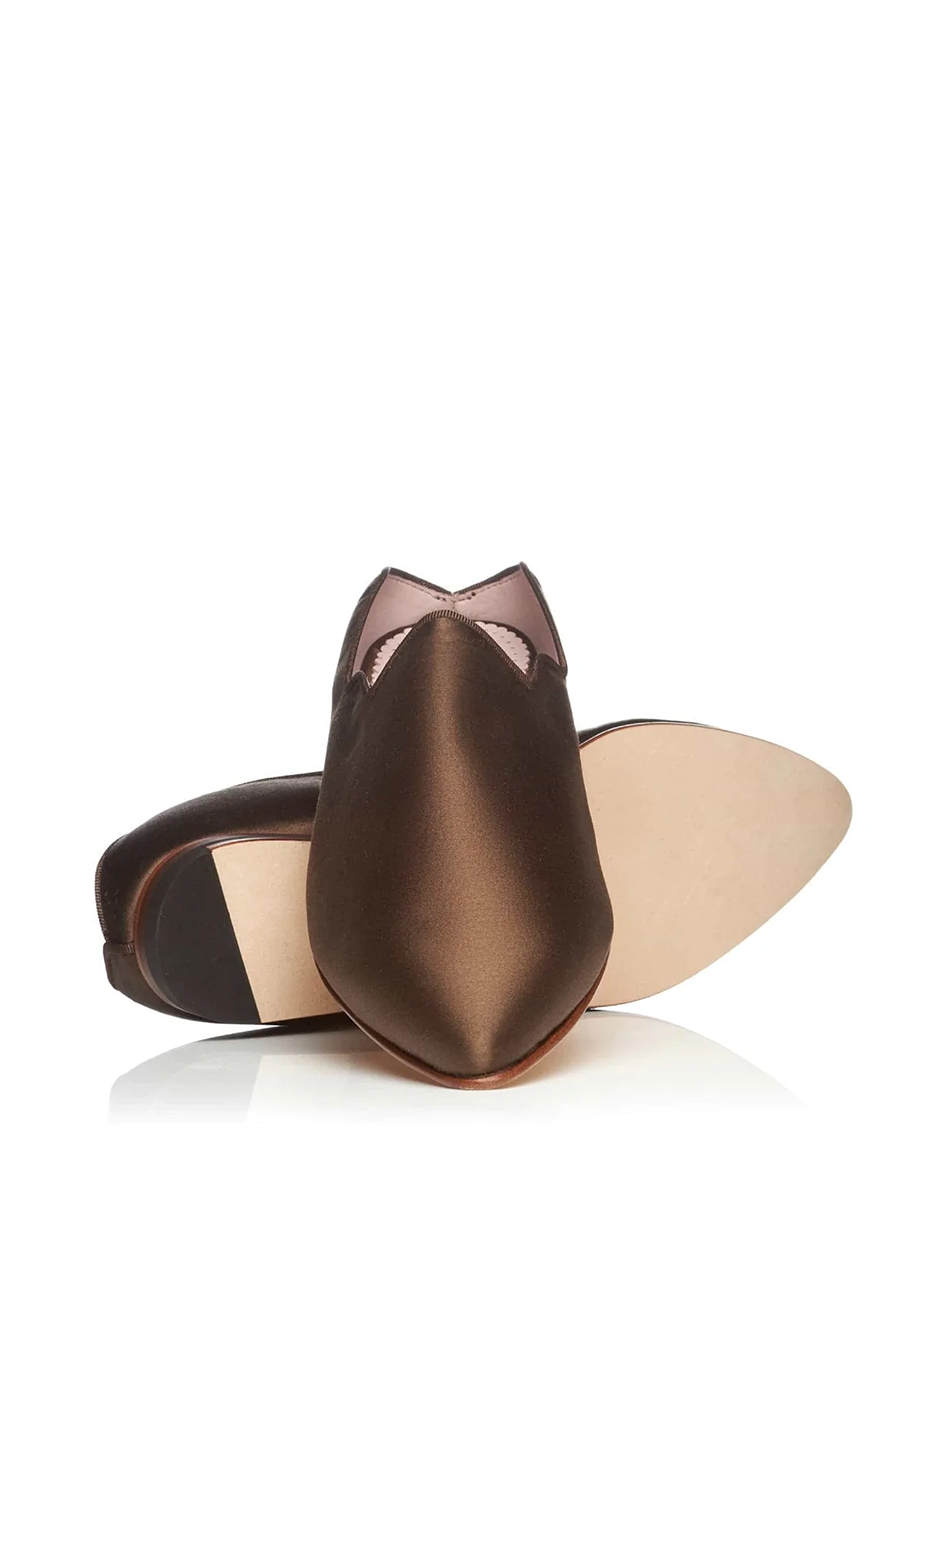 mariano shoes satin mules